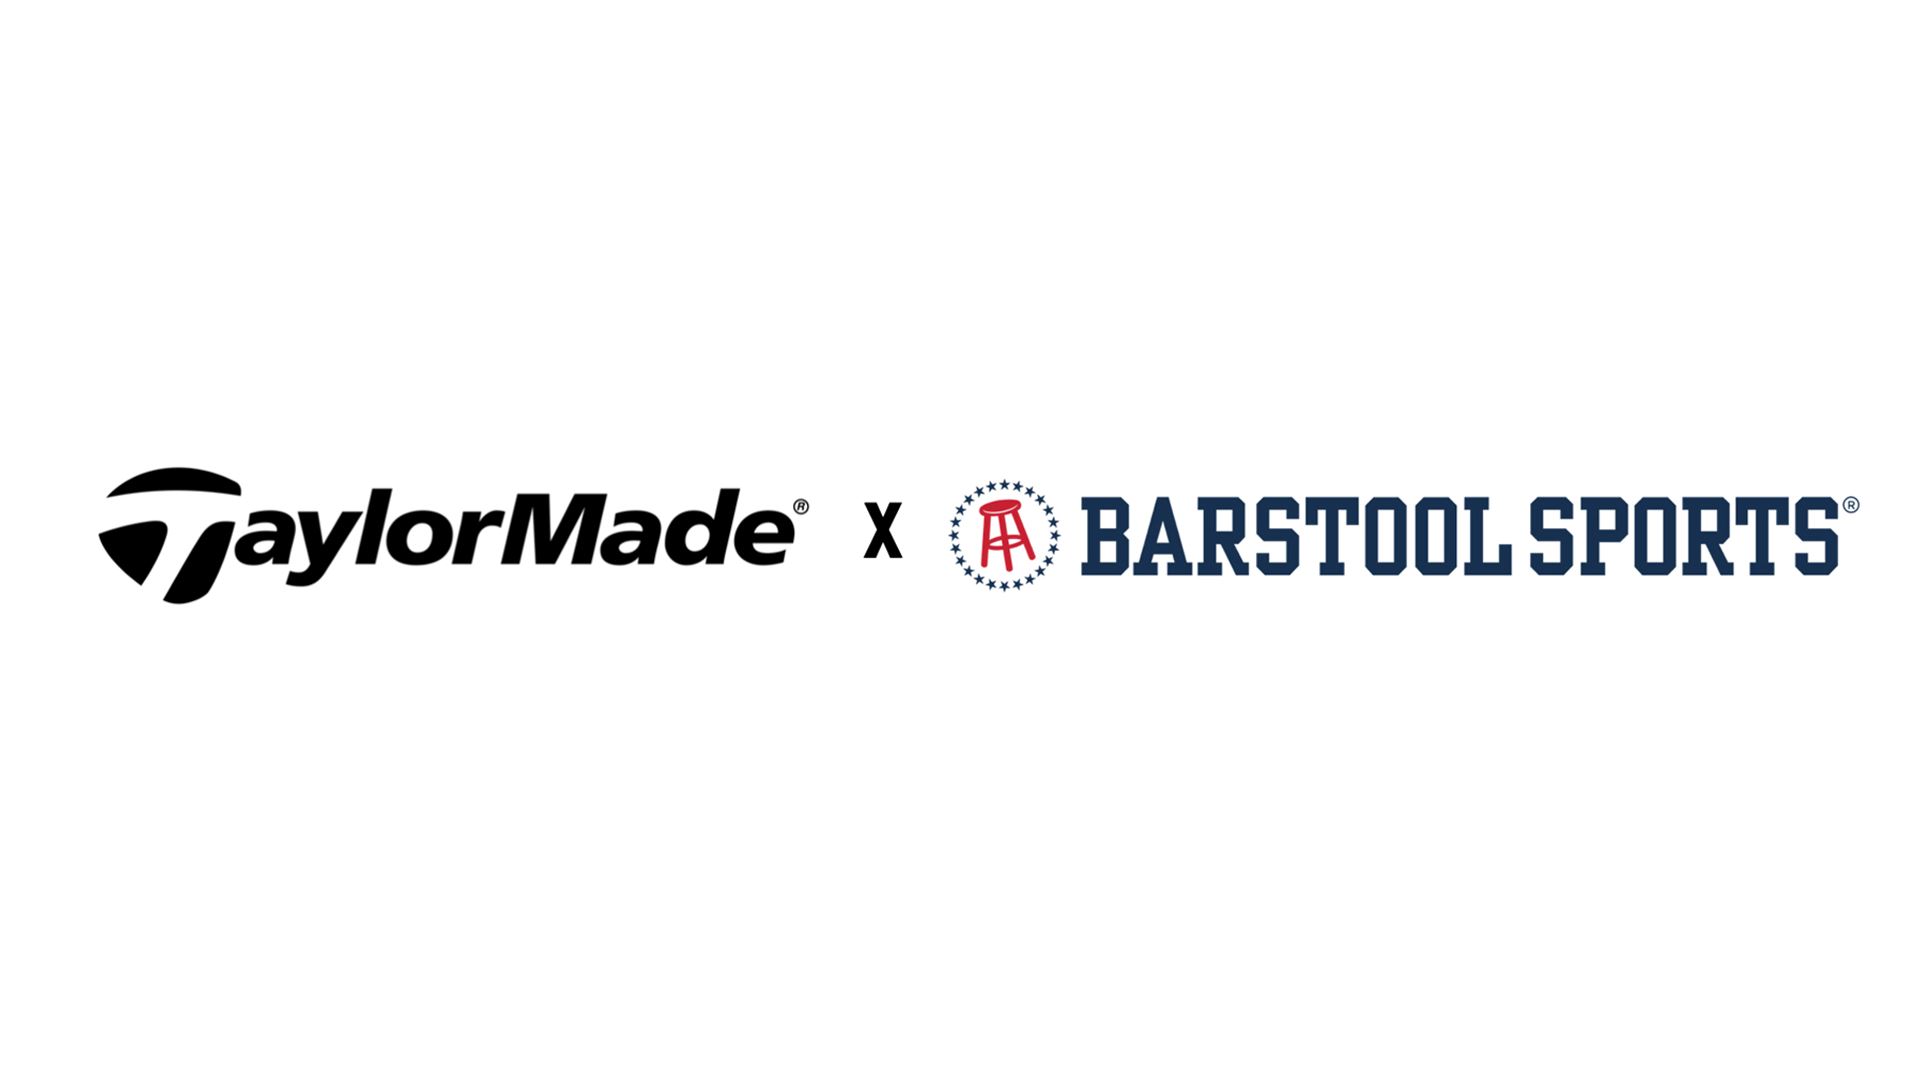 TaylorMade Golf Company Teams With Barstool Sports, Connecting With an Intensely Loyal and Engaged Fanbase That's Eager to Take On Golf